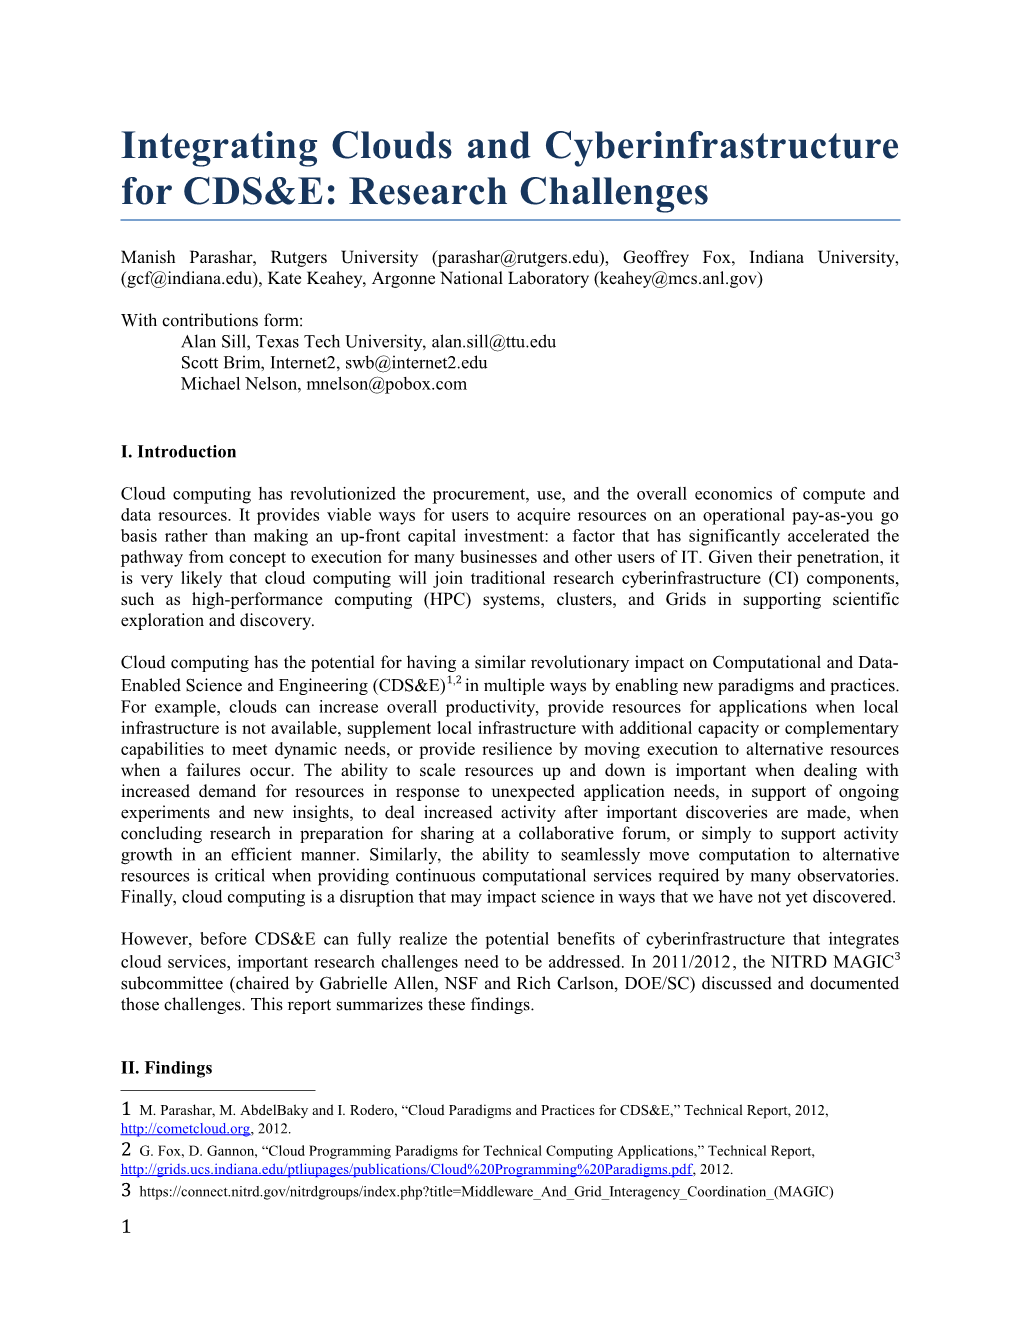 Integrating Clouds and Cyberinfrastructure for CDS&E: Research Challenges